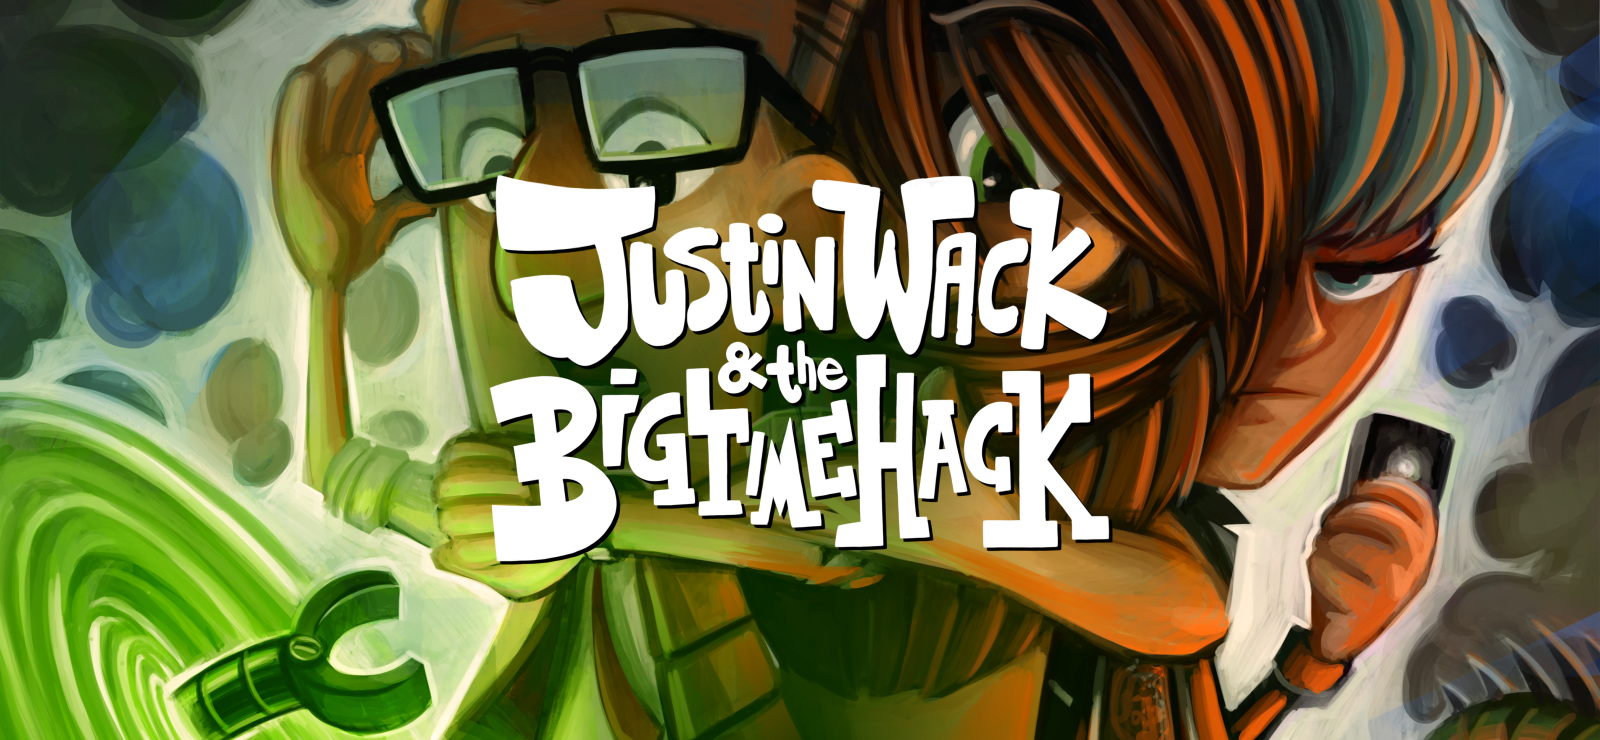 Justin Wack And The Big Time Hack - Official Walkthrough Chart